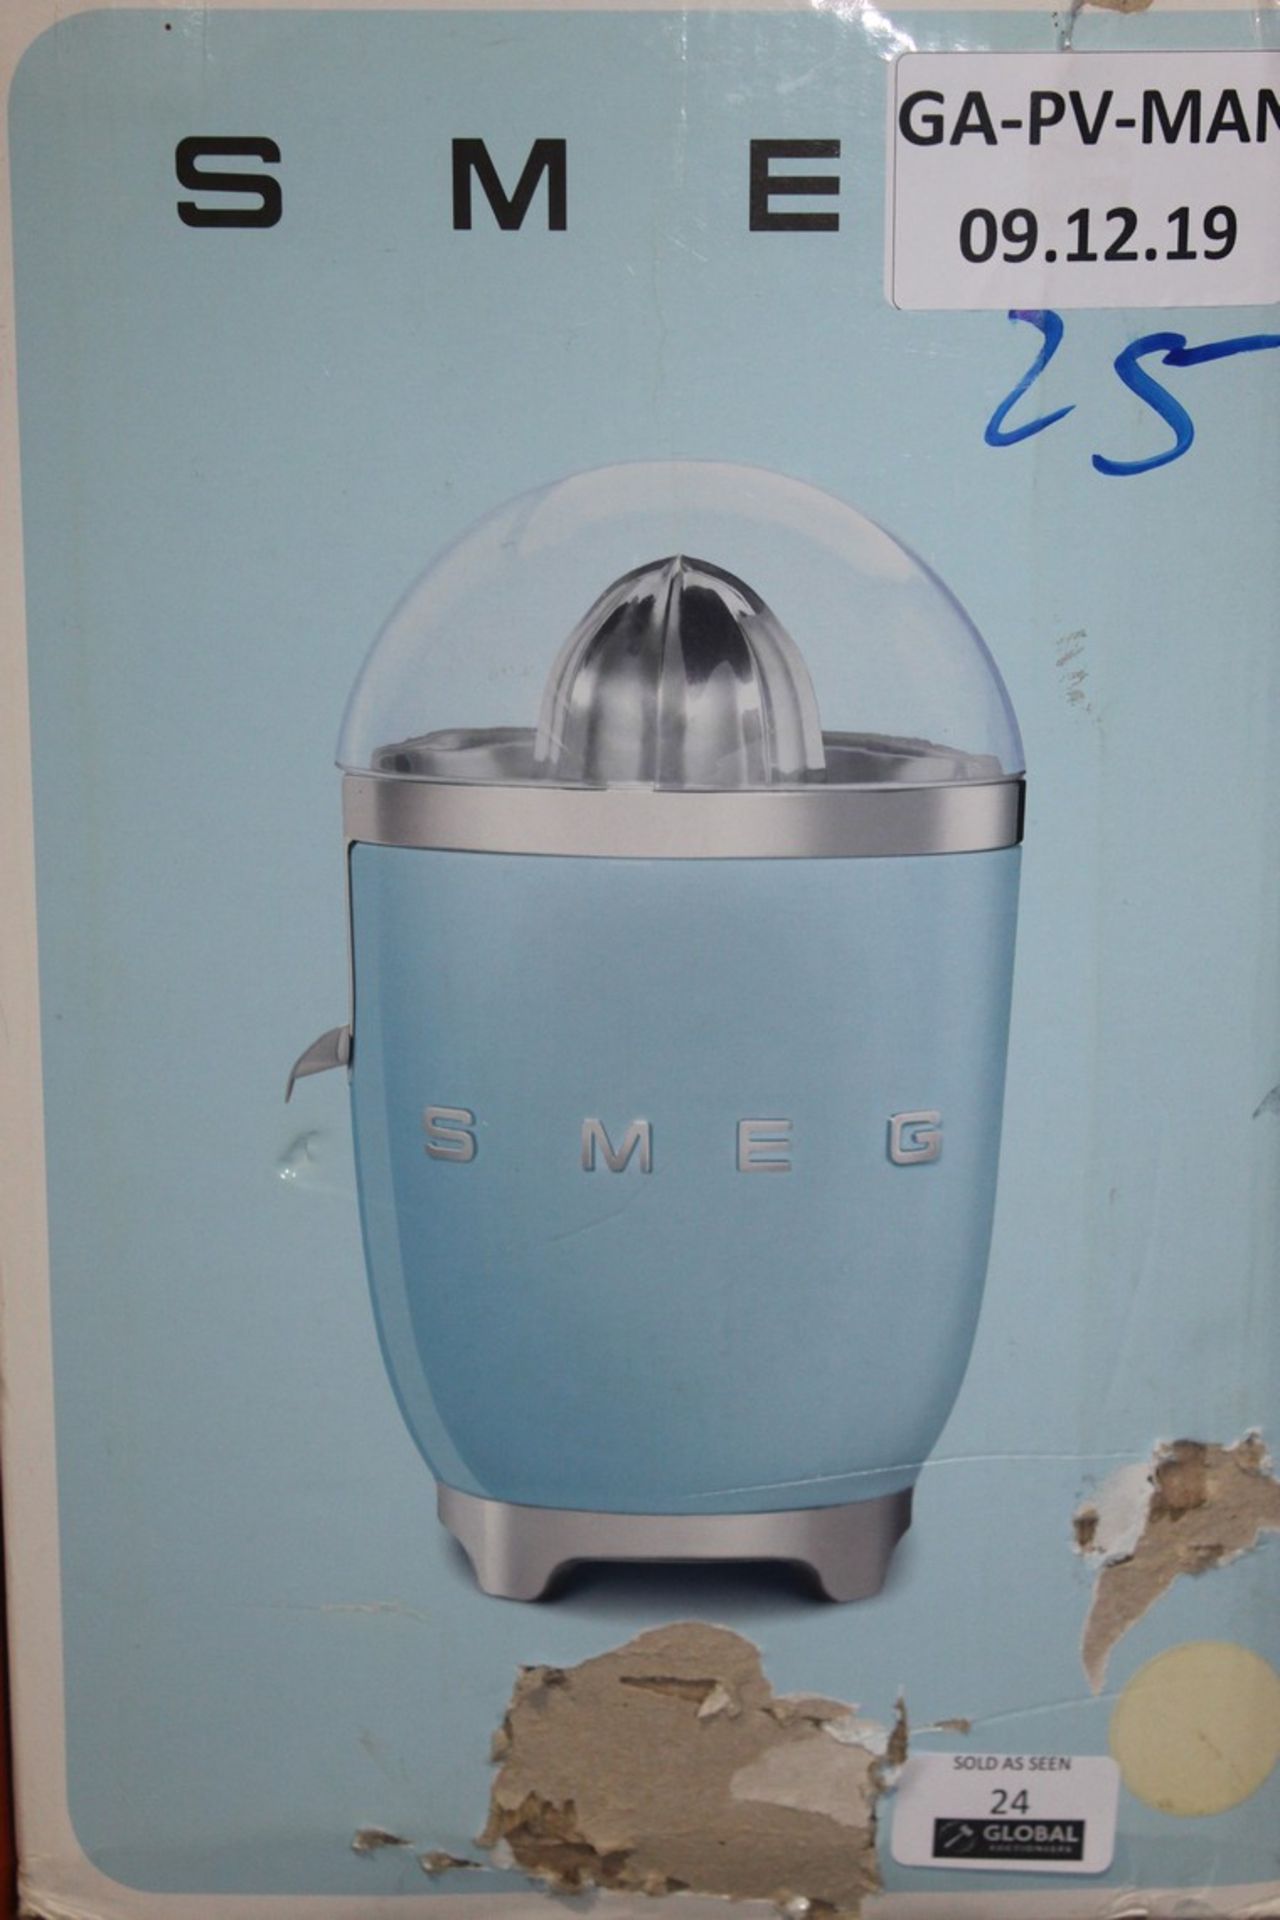 Boxed Smeg Cream Fruit Juicer RRP £130 (Image For Illustration Purposes Only, Package Shows Blue